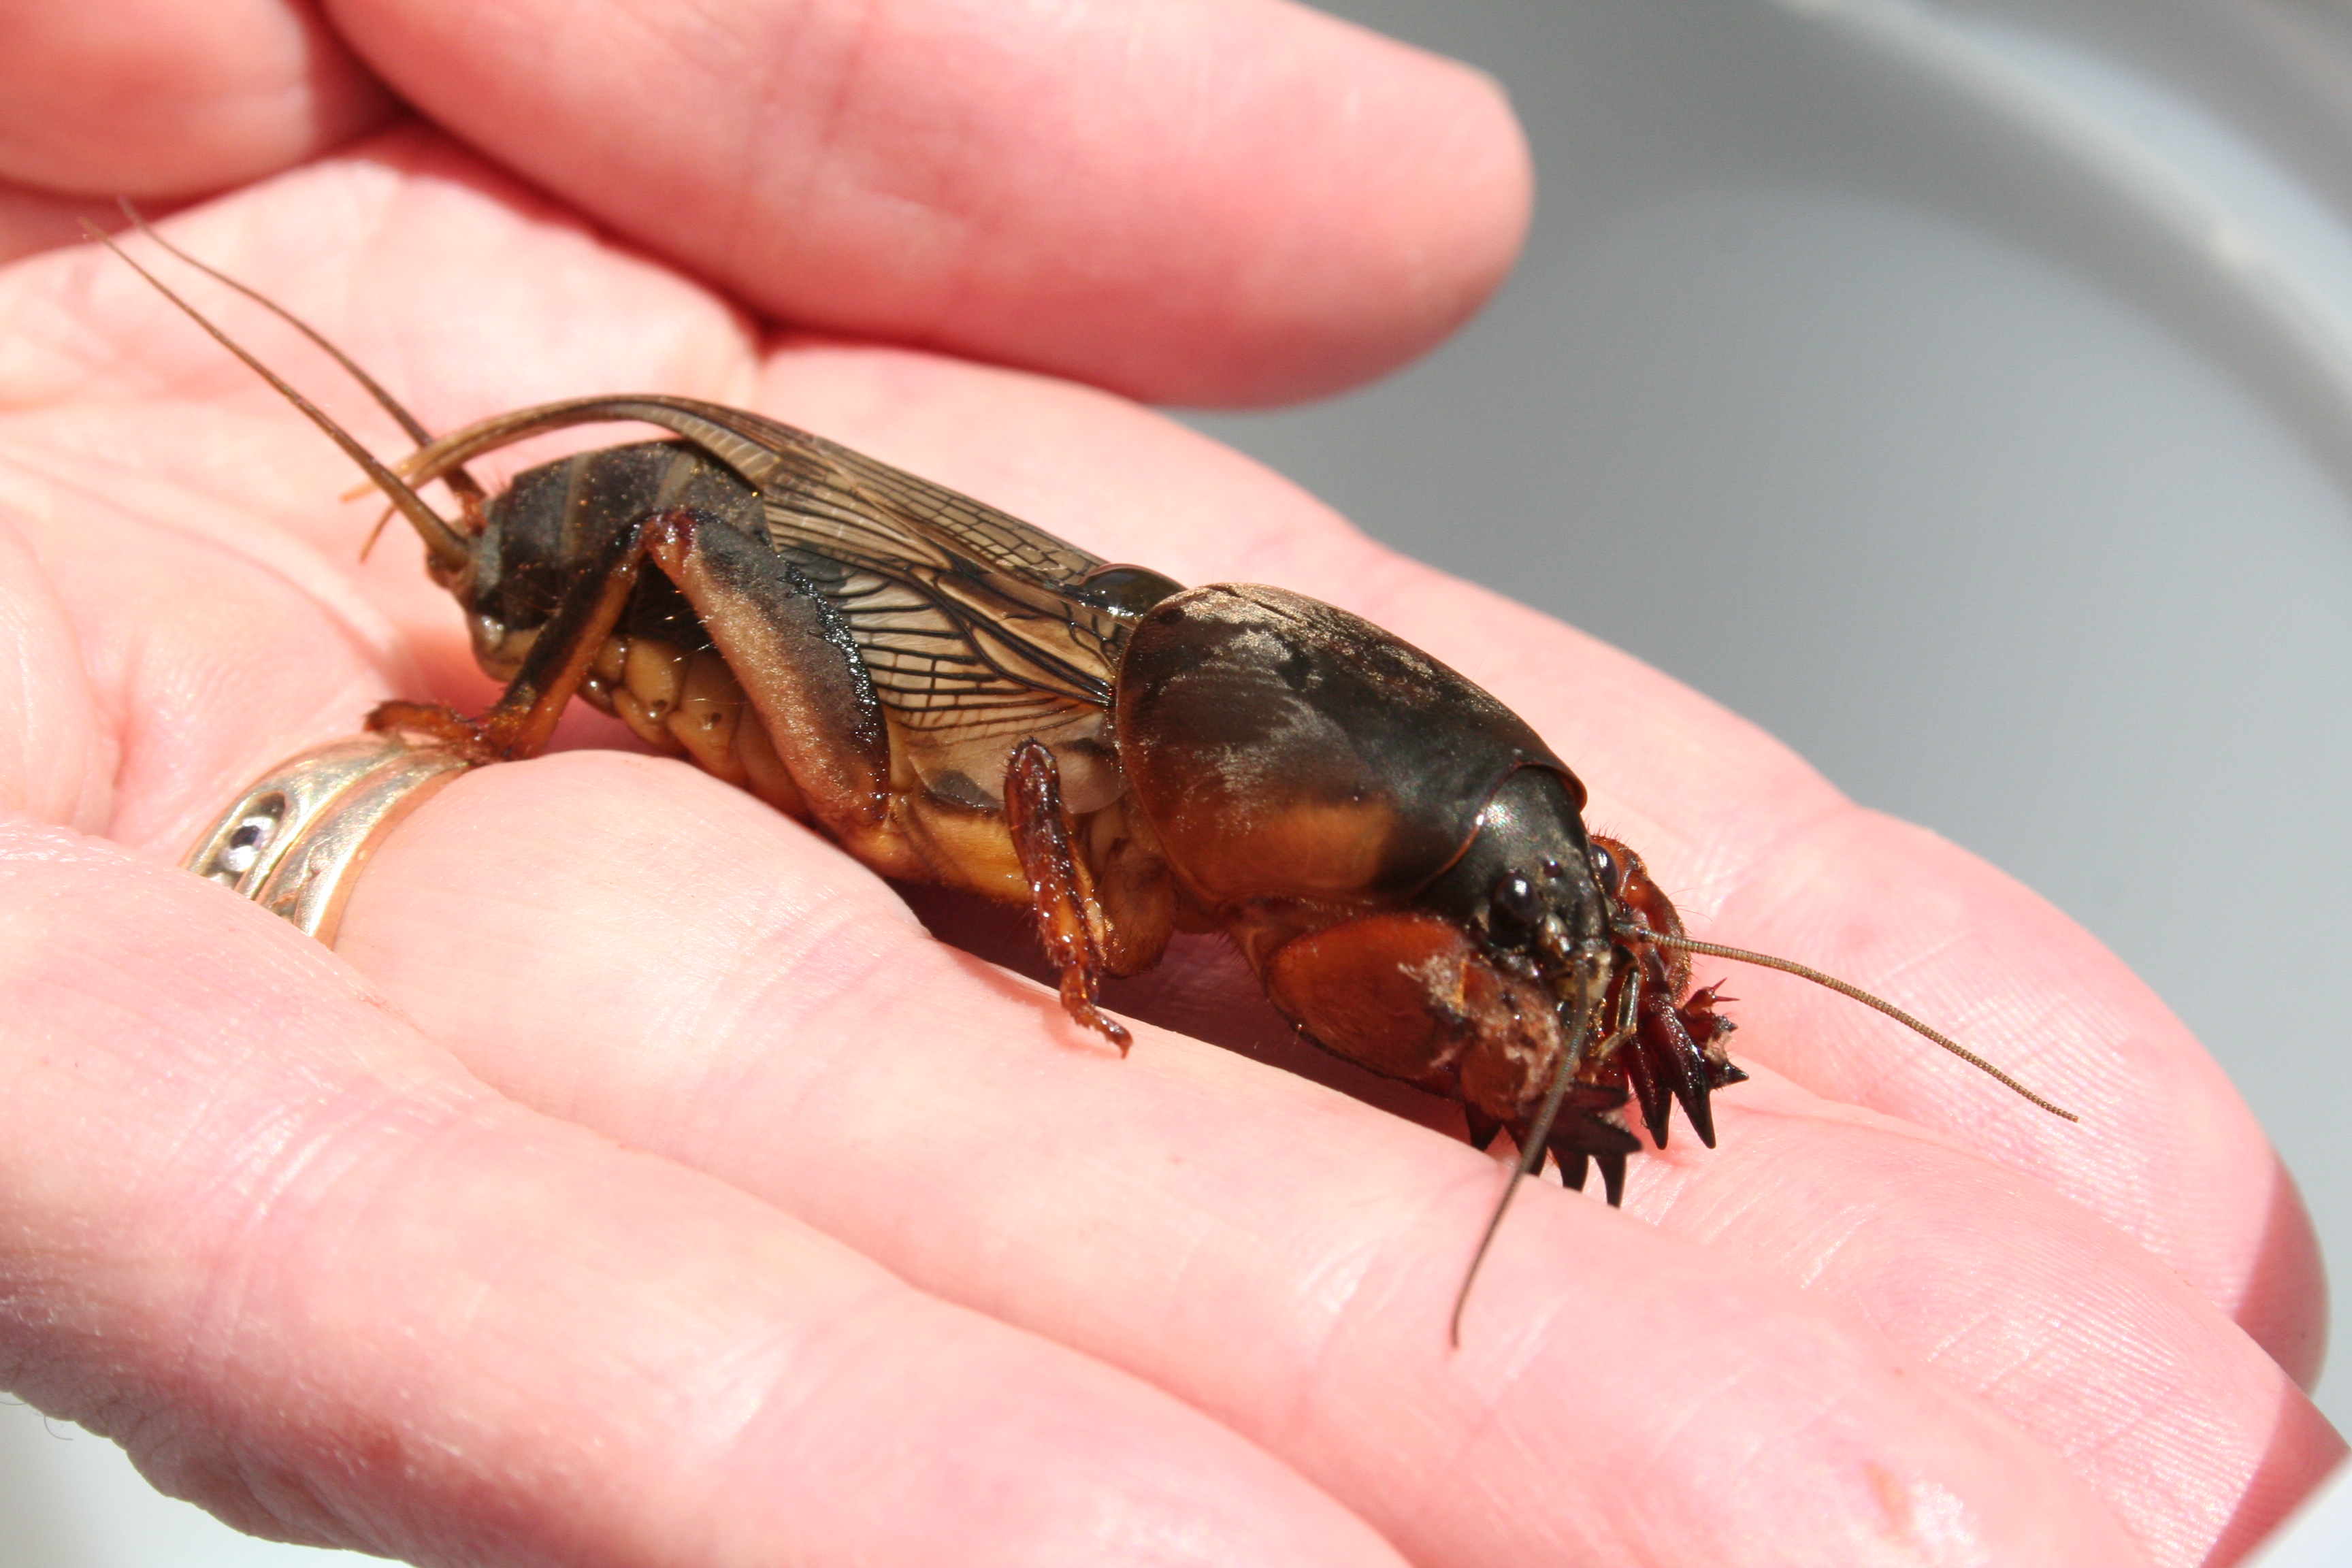 Image of mole cricket in person's hand.